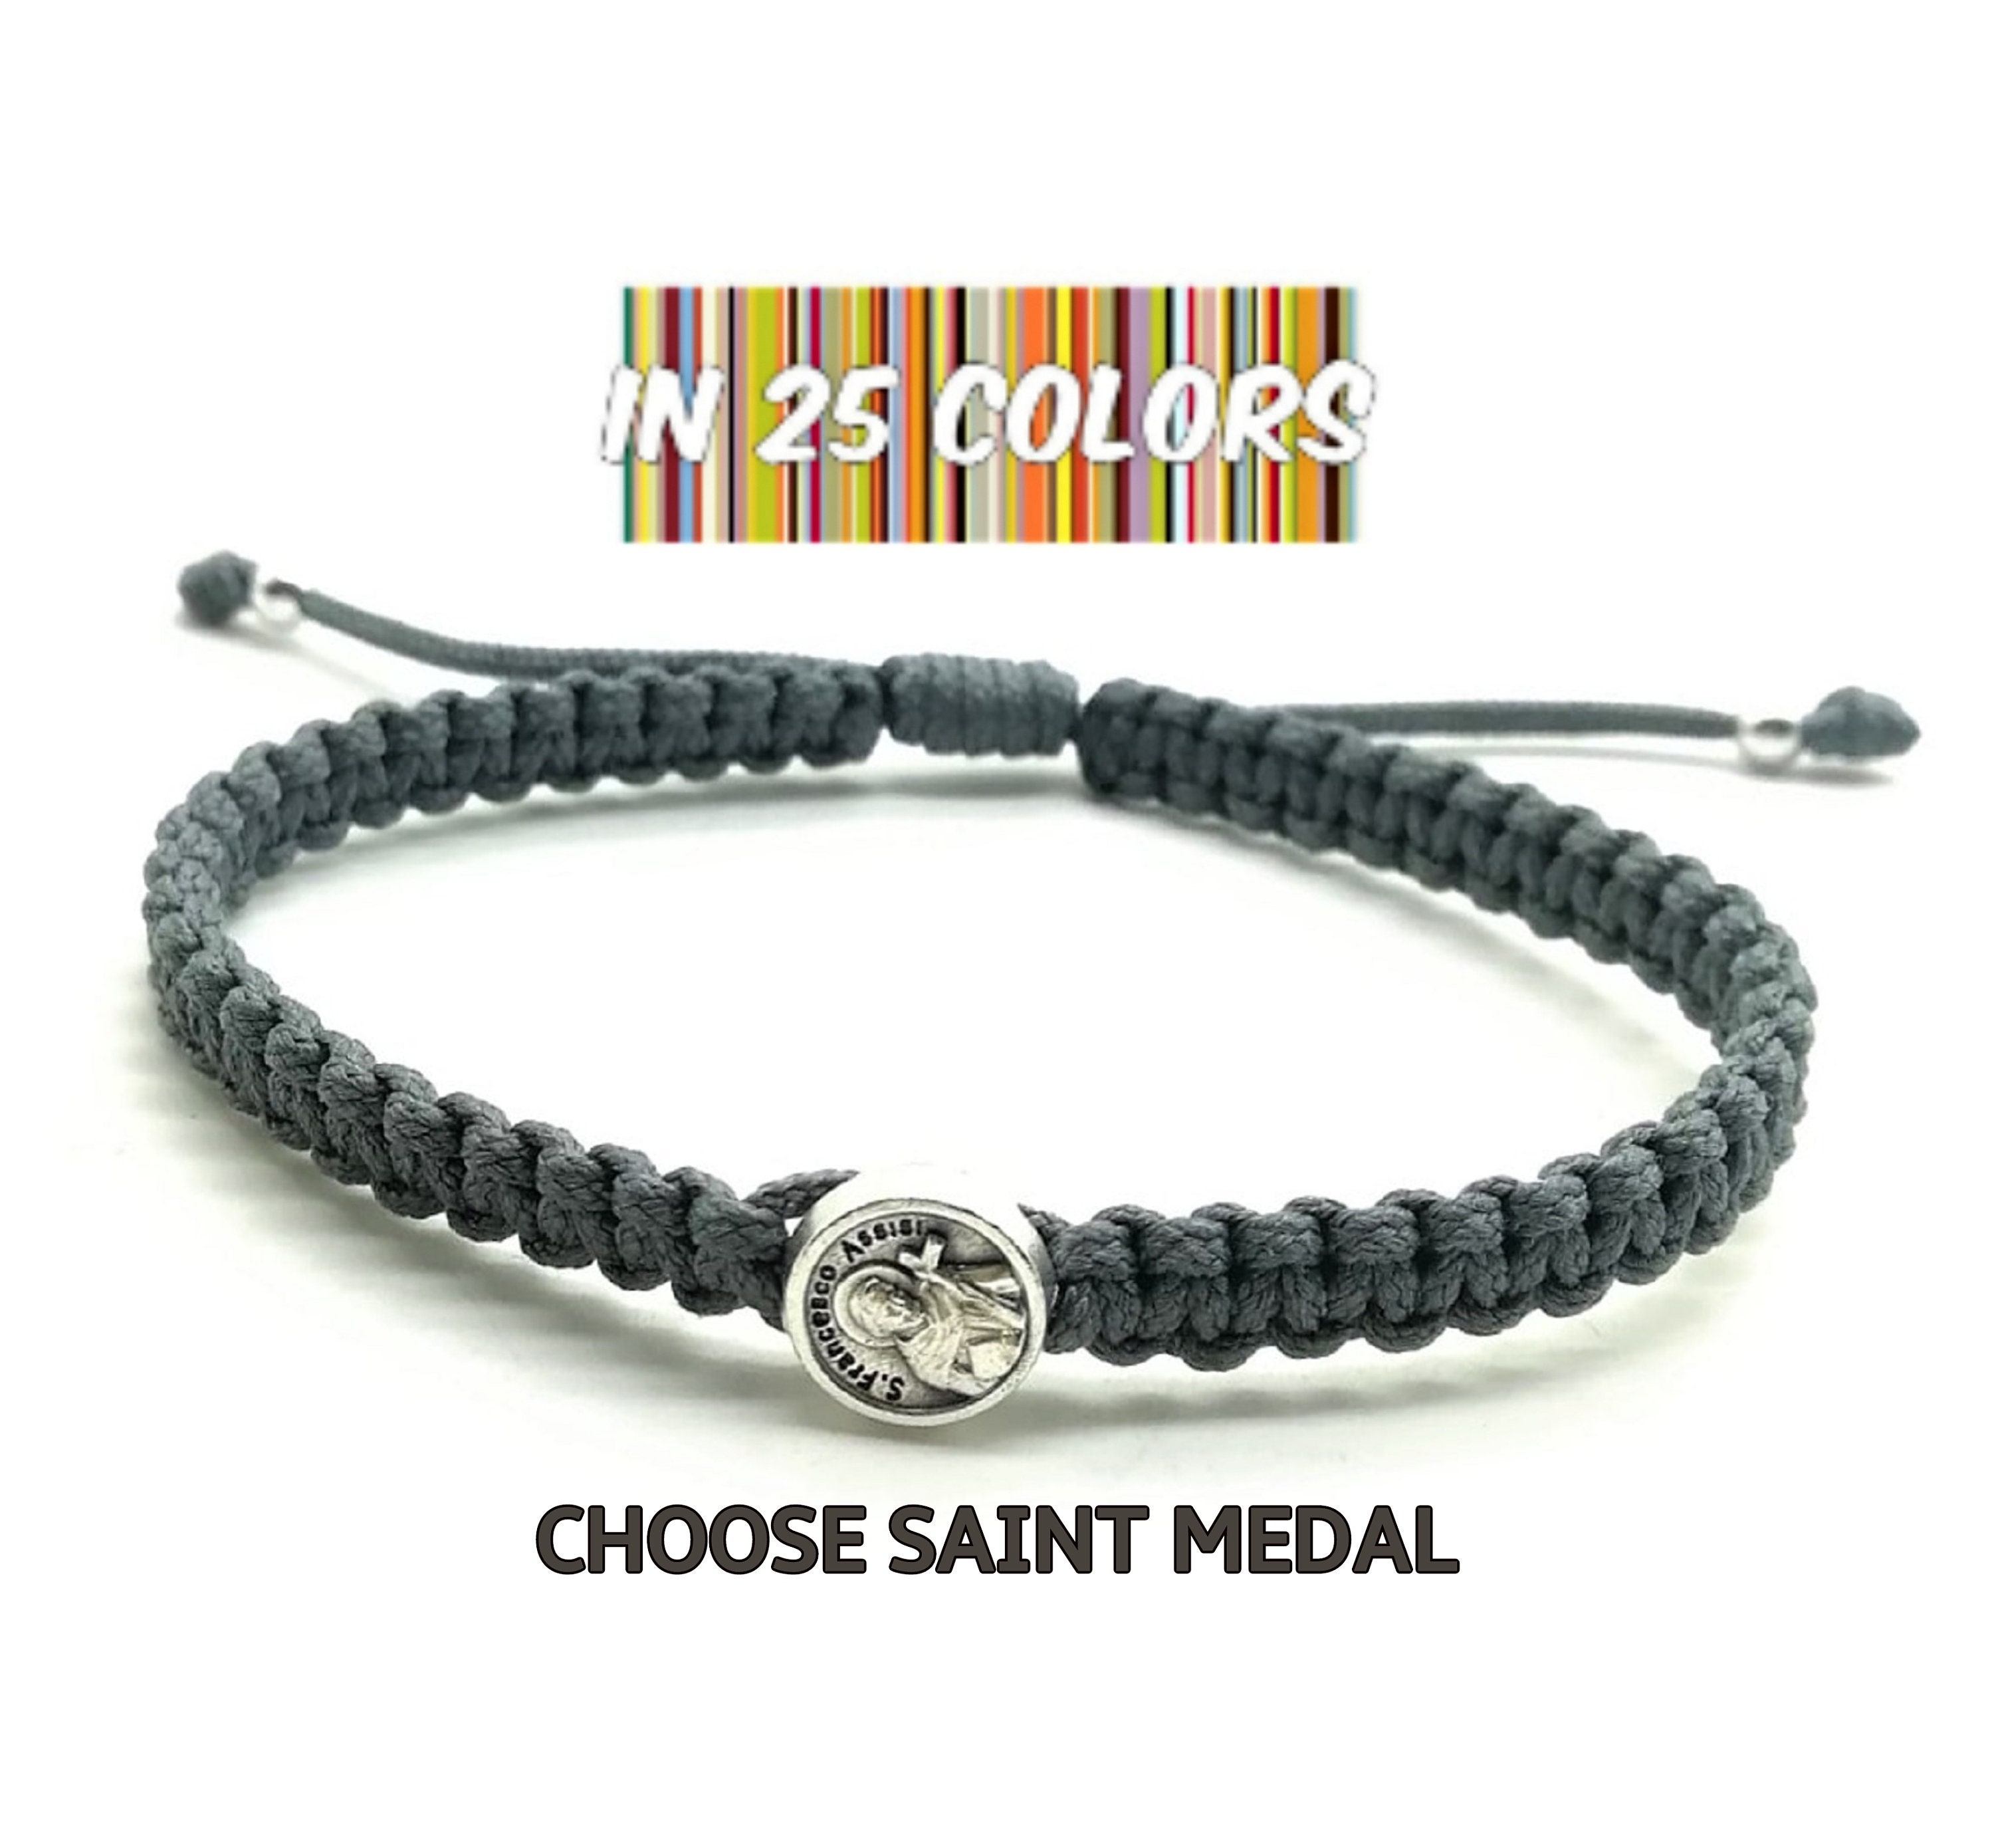 Saint Francis of Assisi the Patron Saint of Animals Catholic Saint Necklace in Stainless Steel